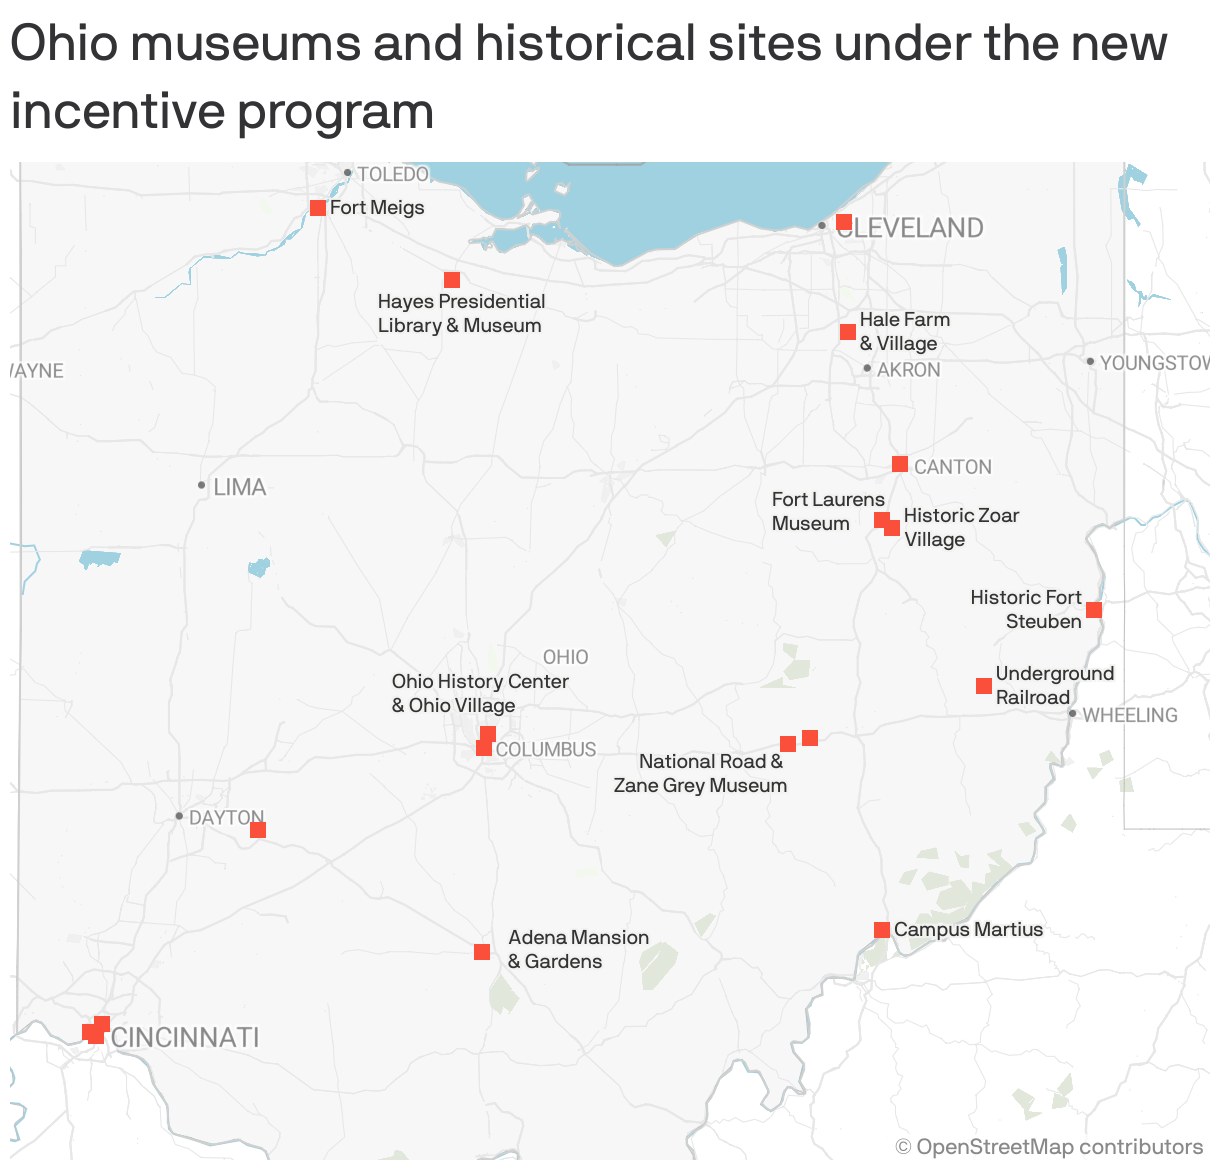 Ohio museums and historical sites under the new incentive program